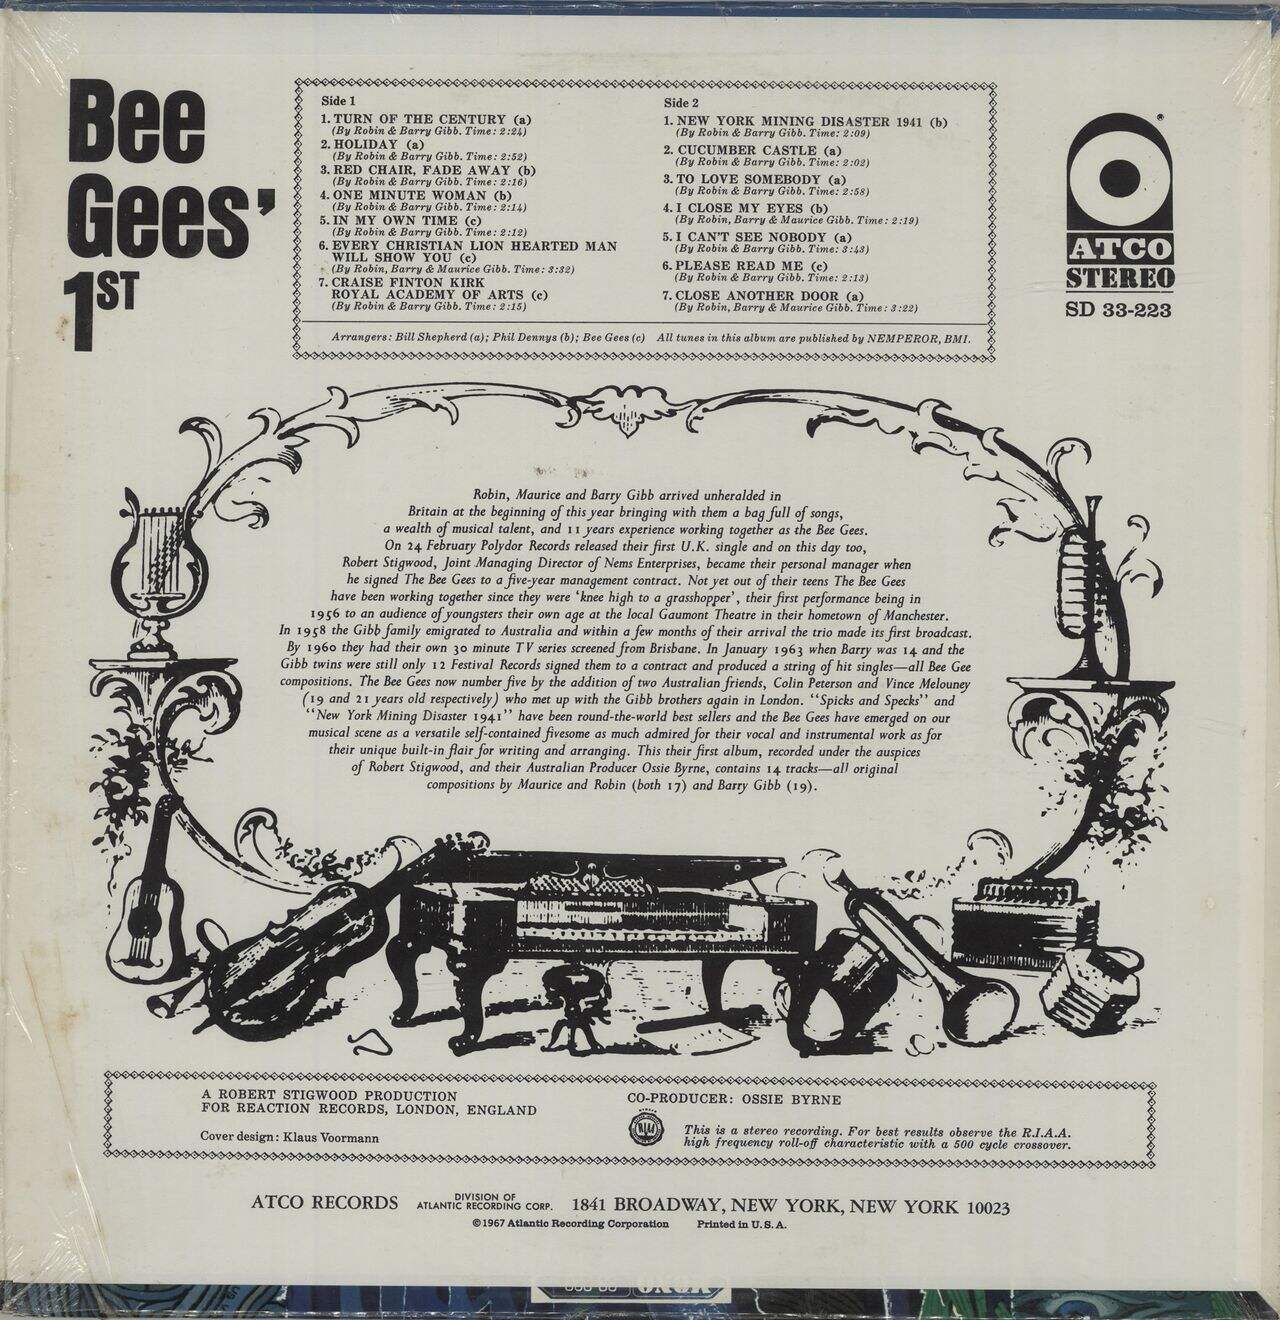 The Bee Gees Bee Gees' 1st - Holiday Hype Sticker & Shrink US Vinyl LP